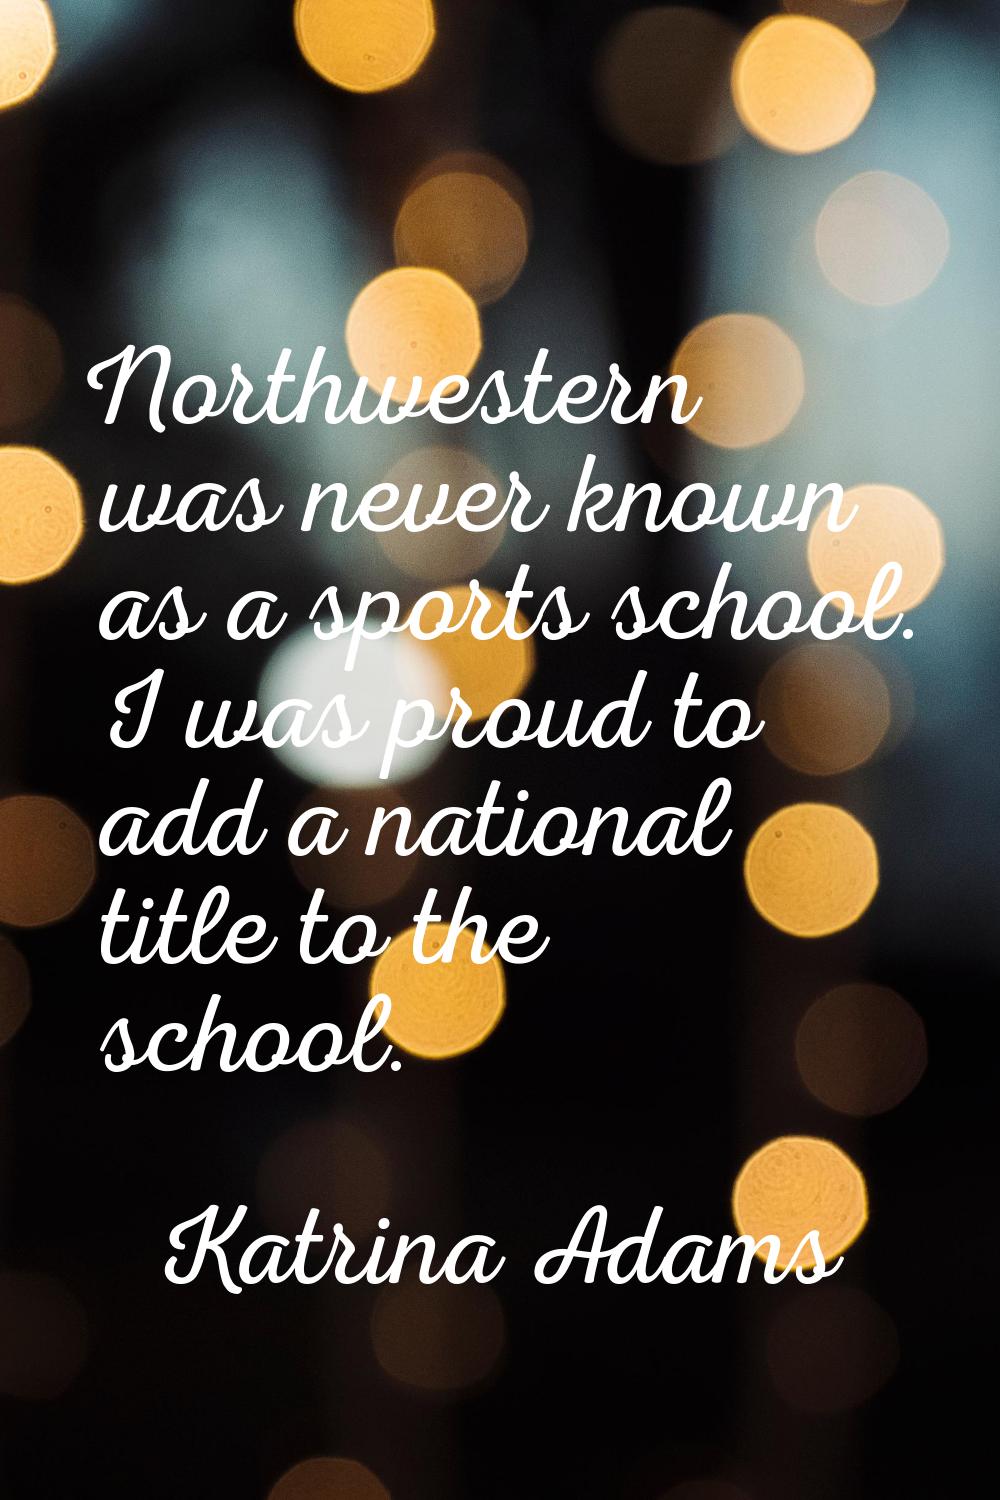 Northwestern was never known as a sports school. I was proud to add a national title to the school.